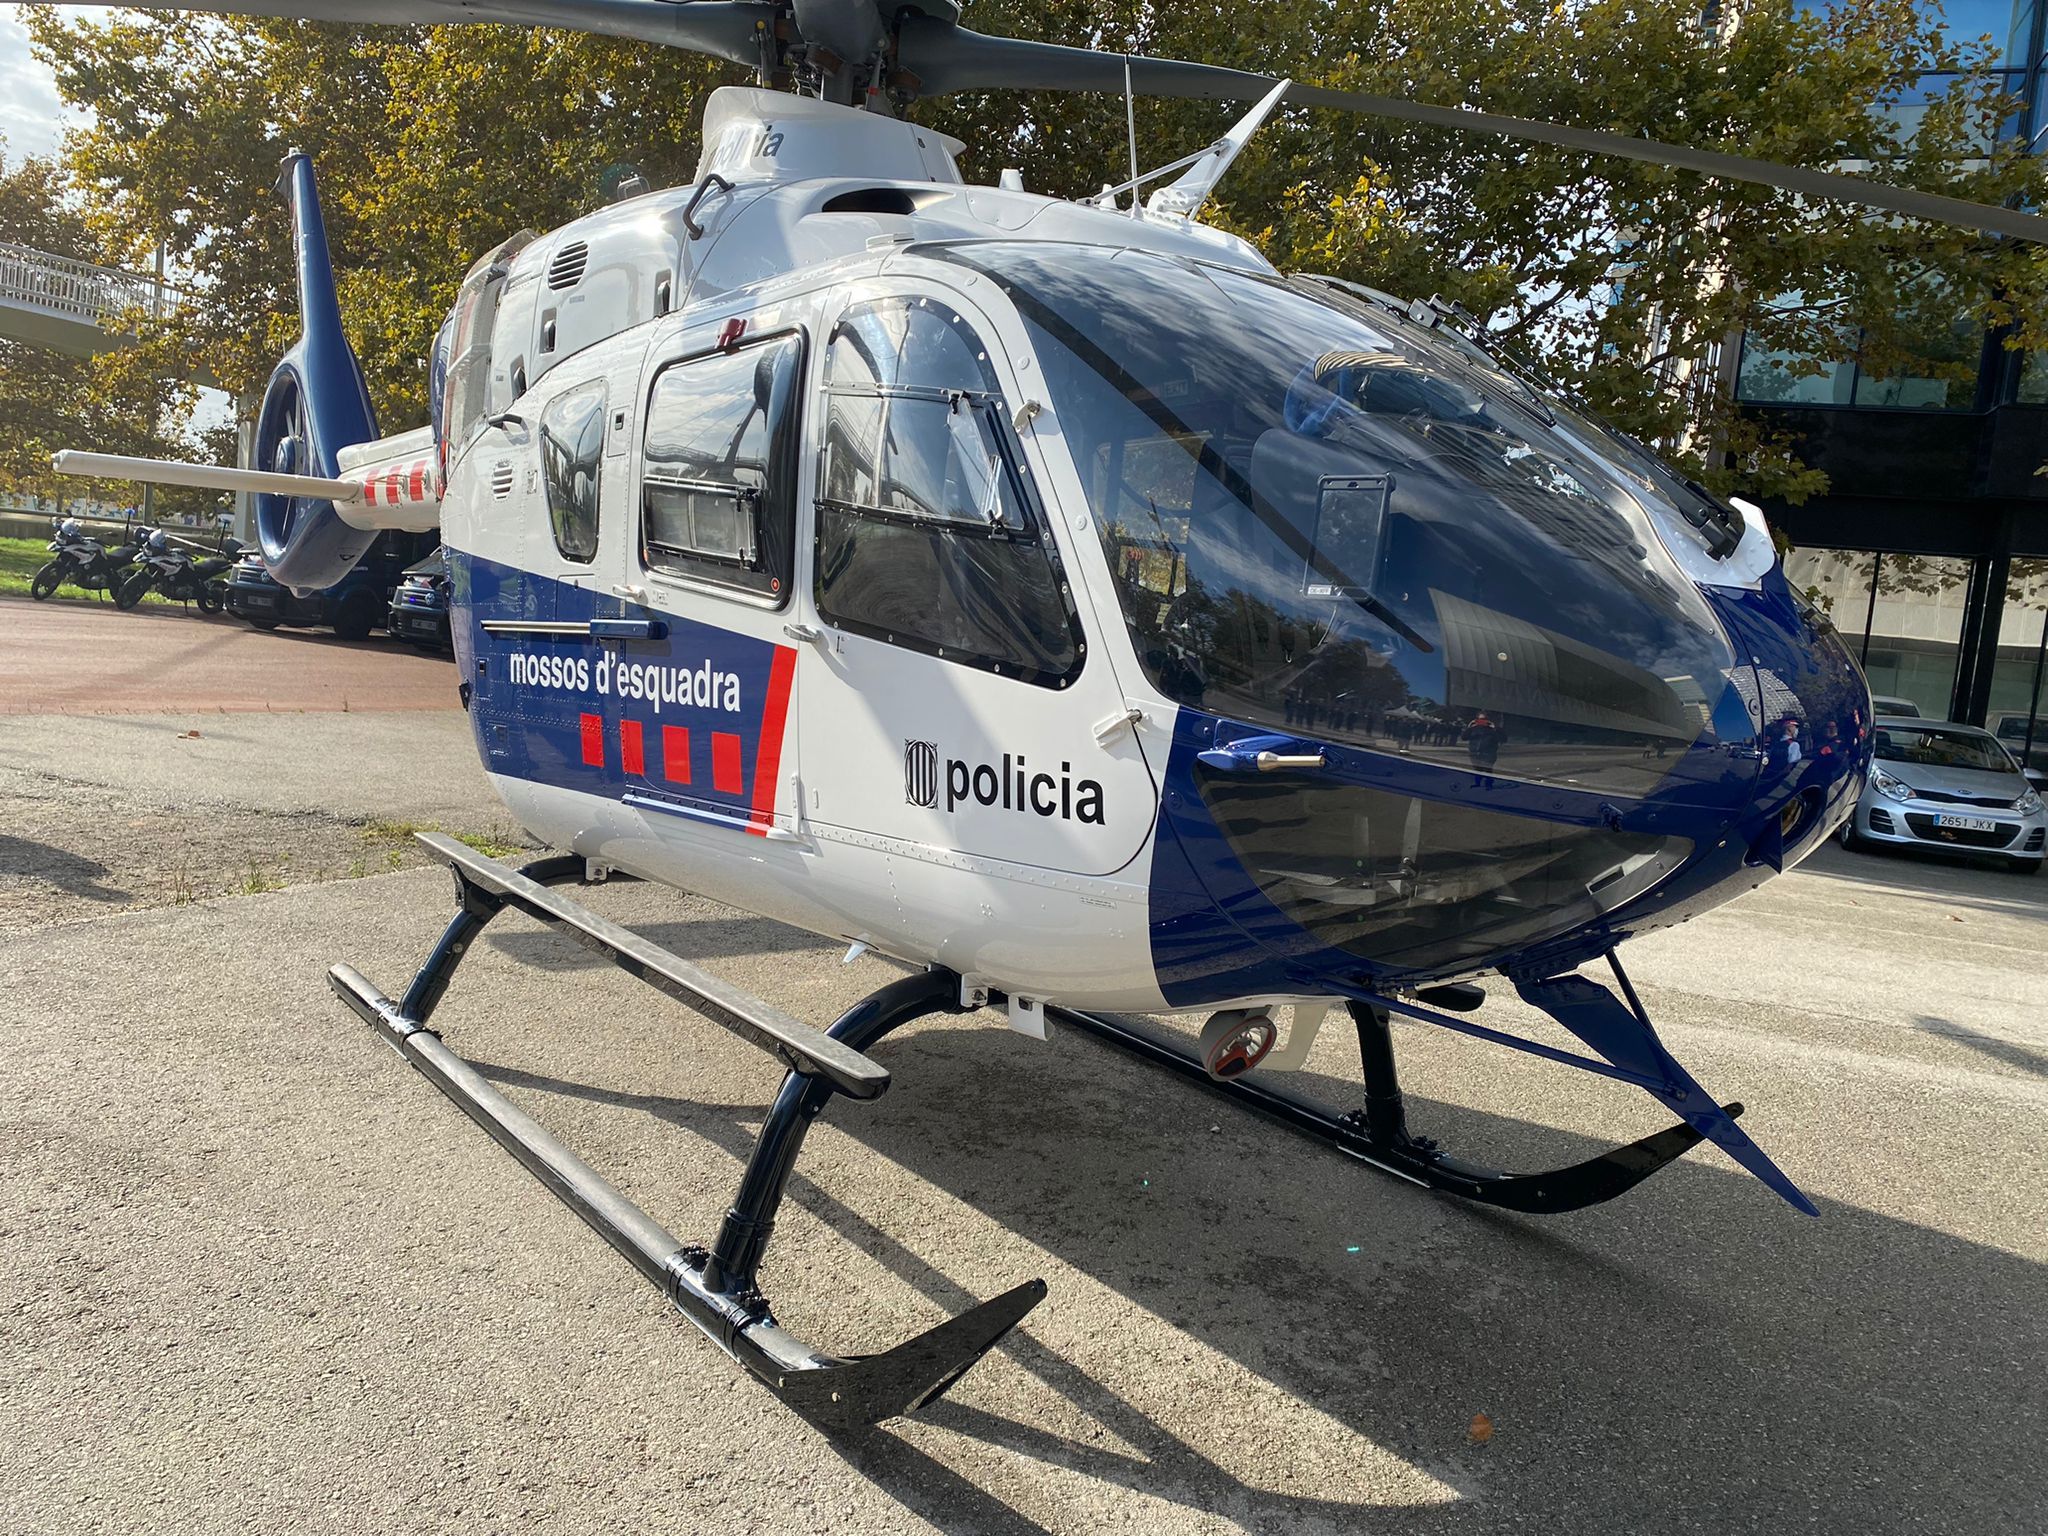 Helicopter Mossos